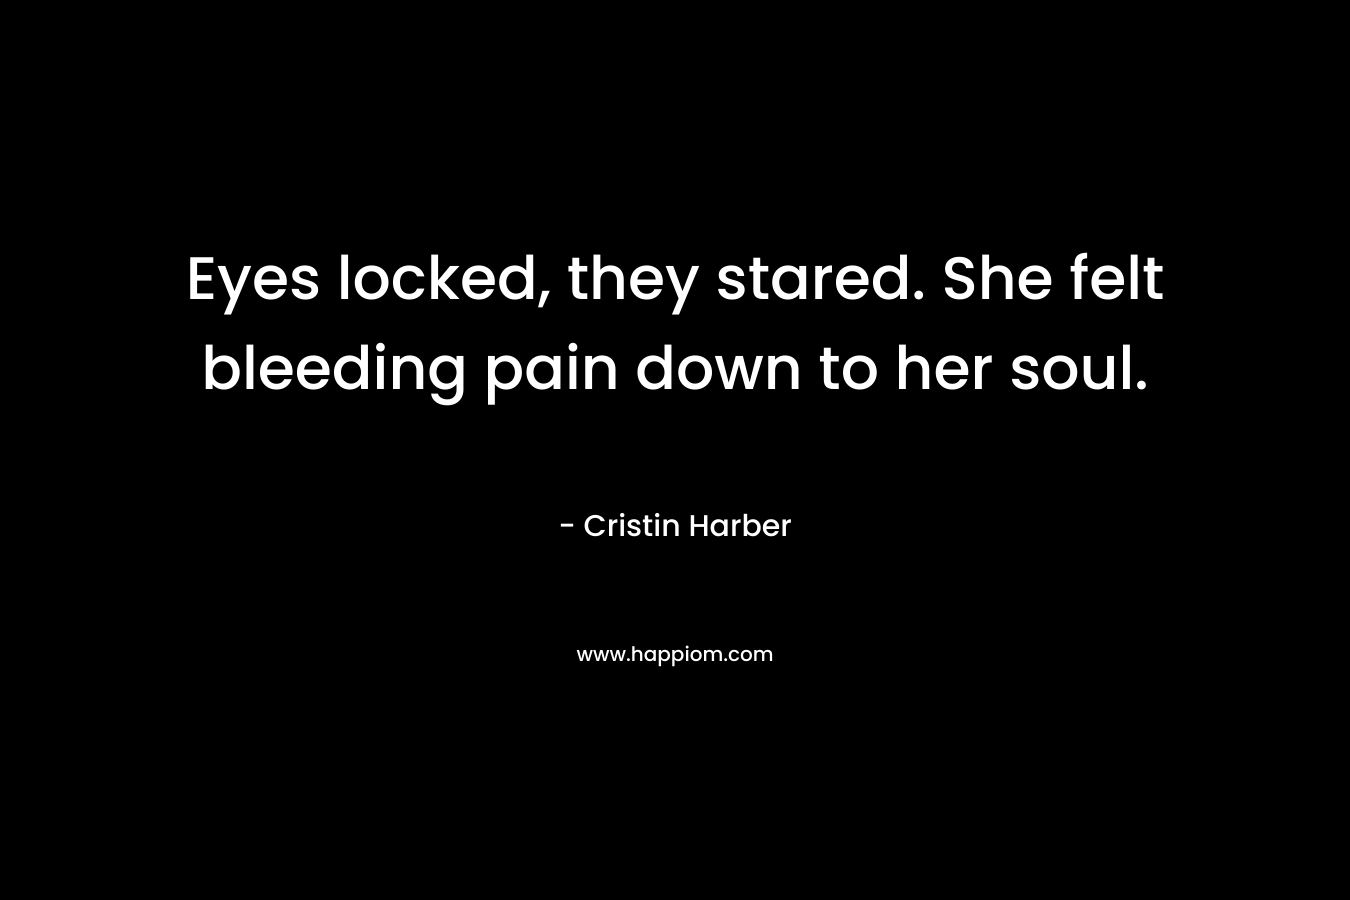 Eyes locked, they stared. She felt bleeding pain down to her soul.